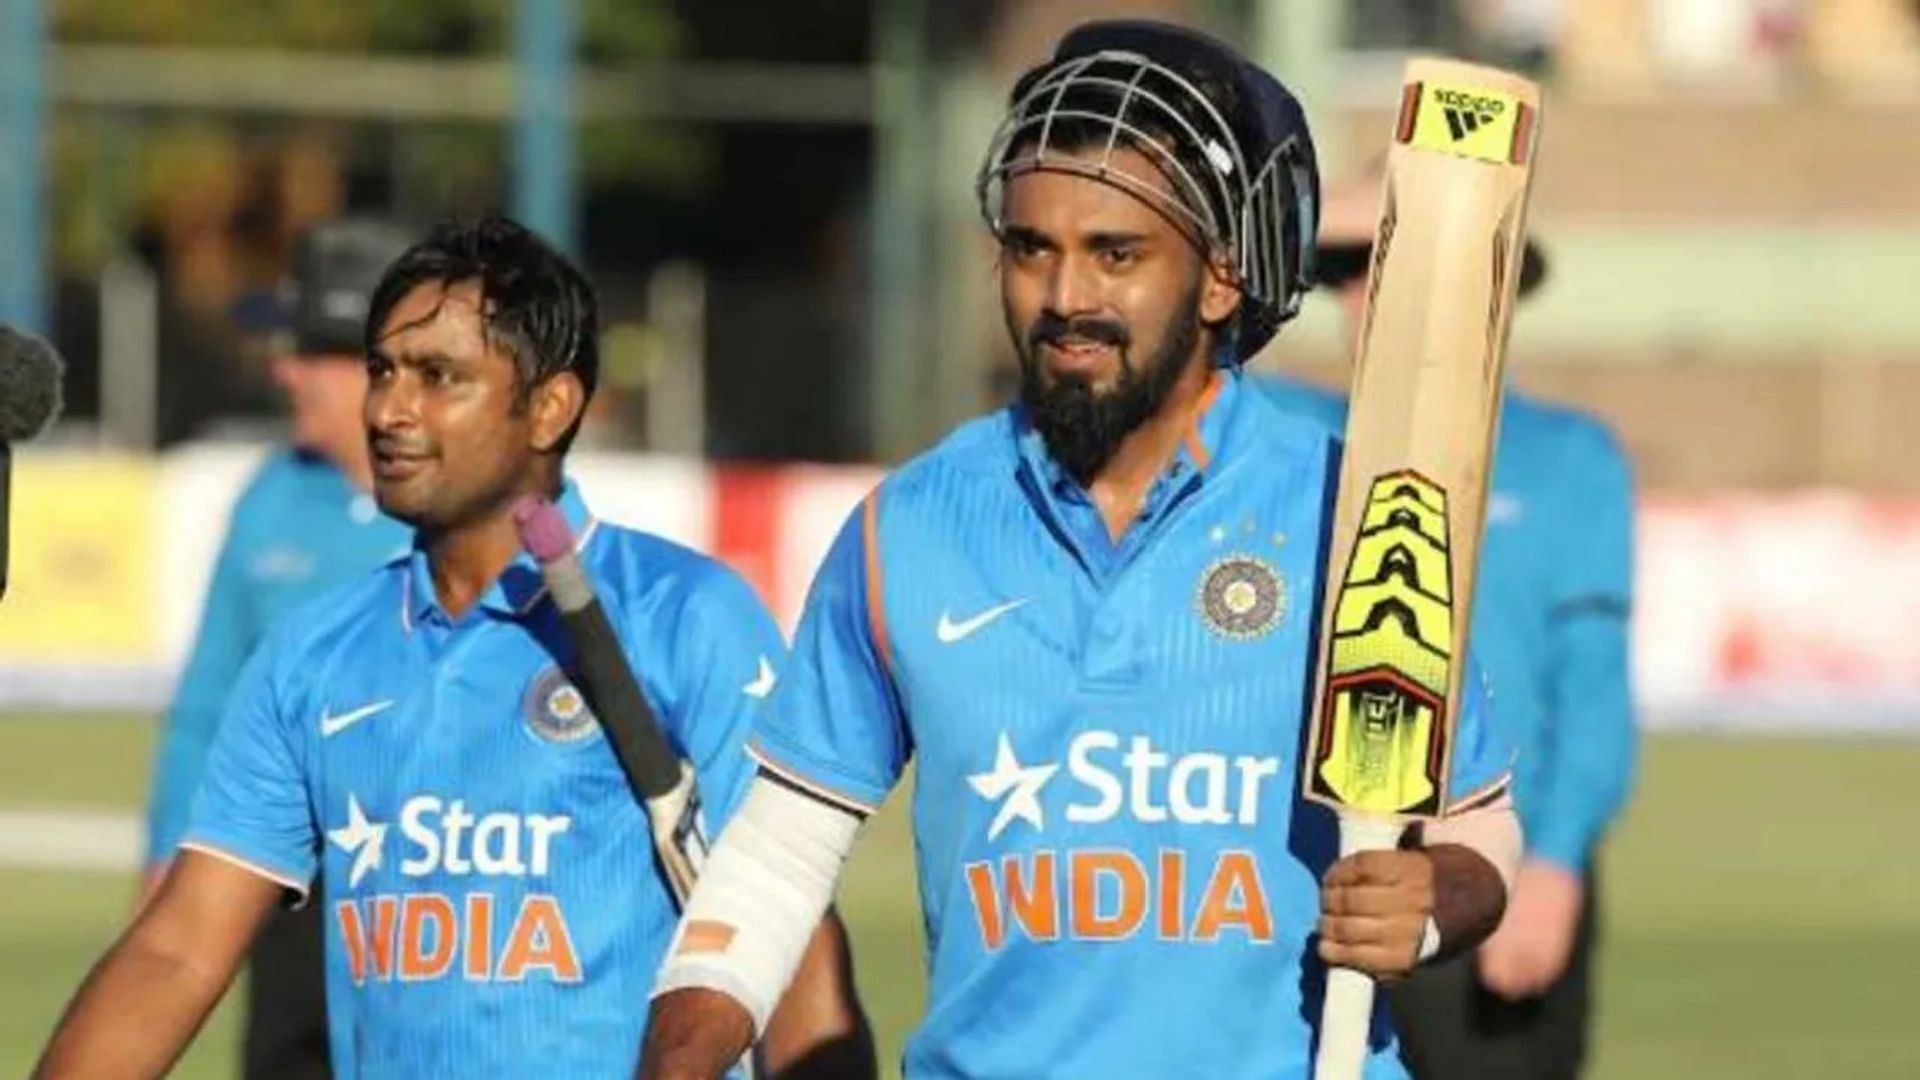 KL Rahul (right) became the first Indian player to score a hundred on ODI debut. (Image Courtesy: espncricinfo.com)